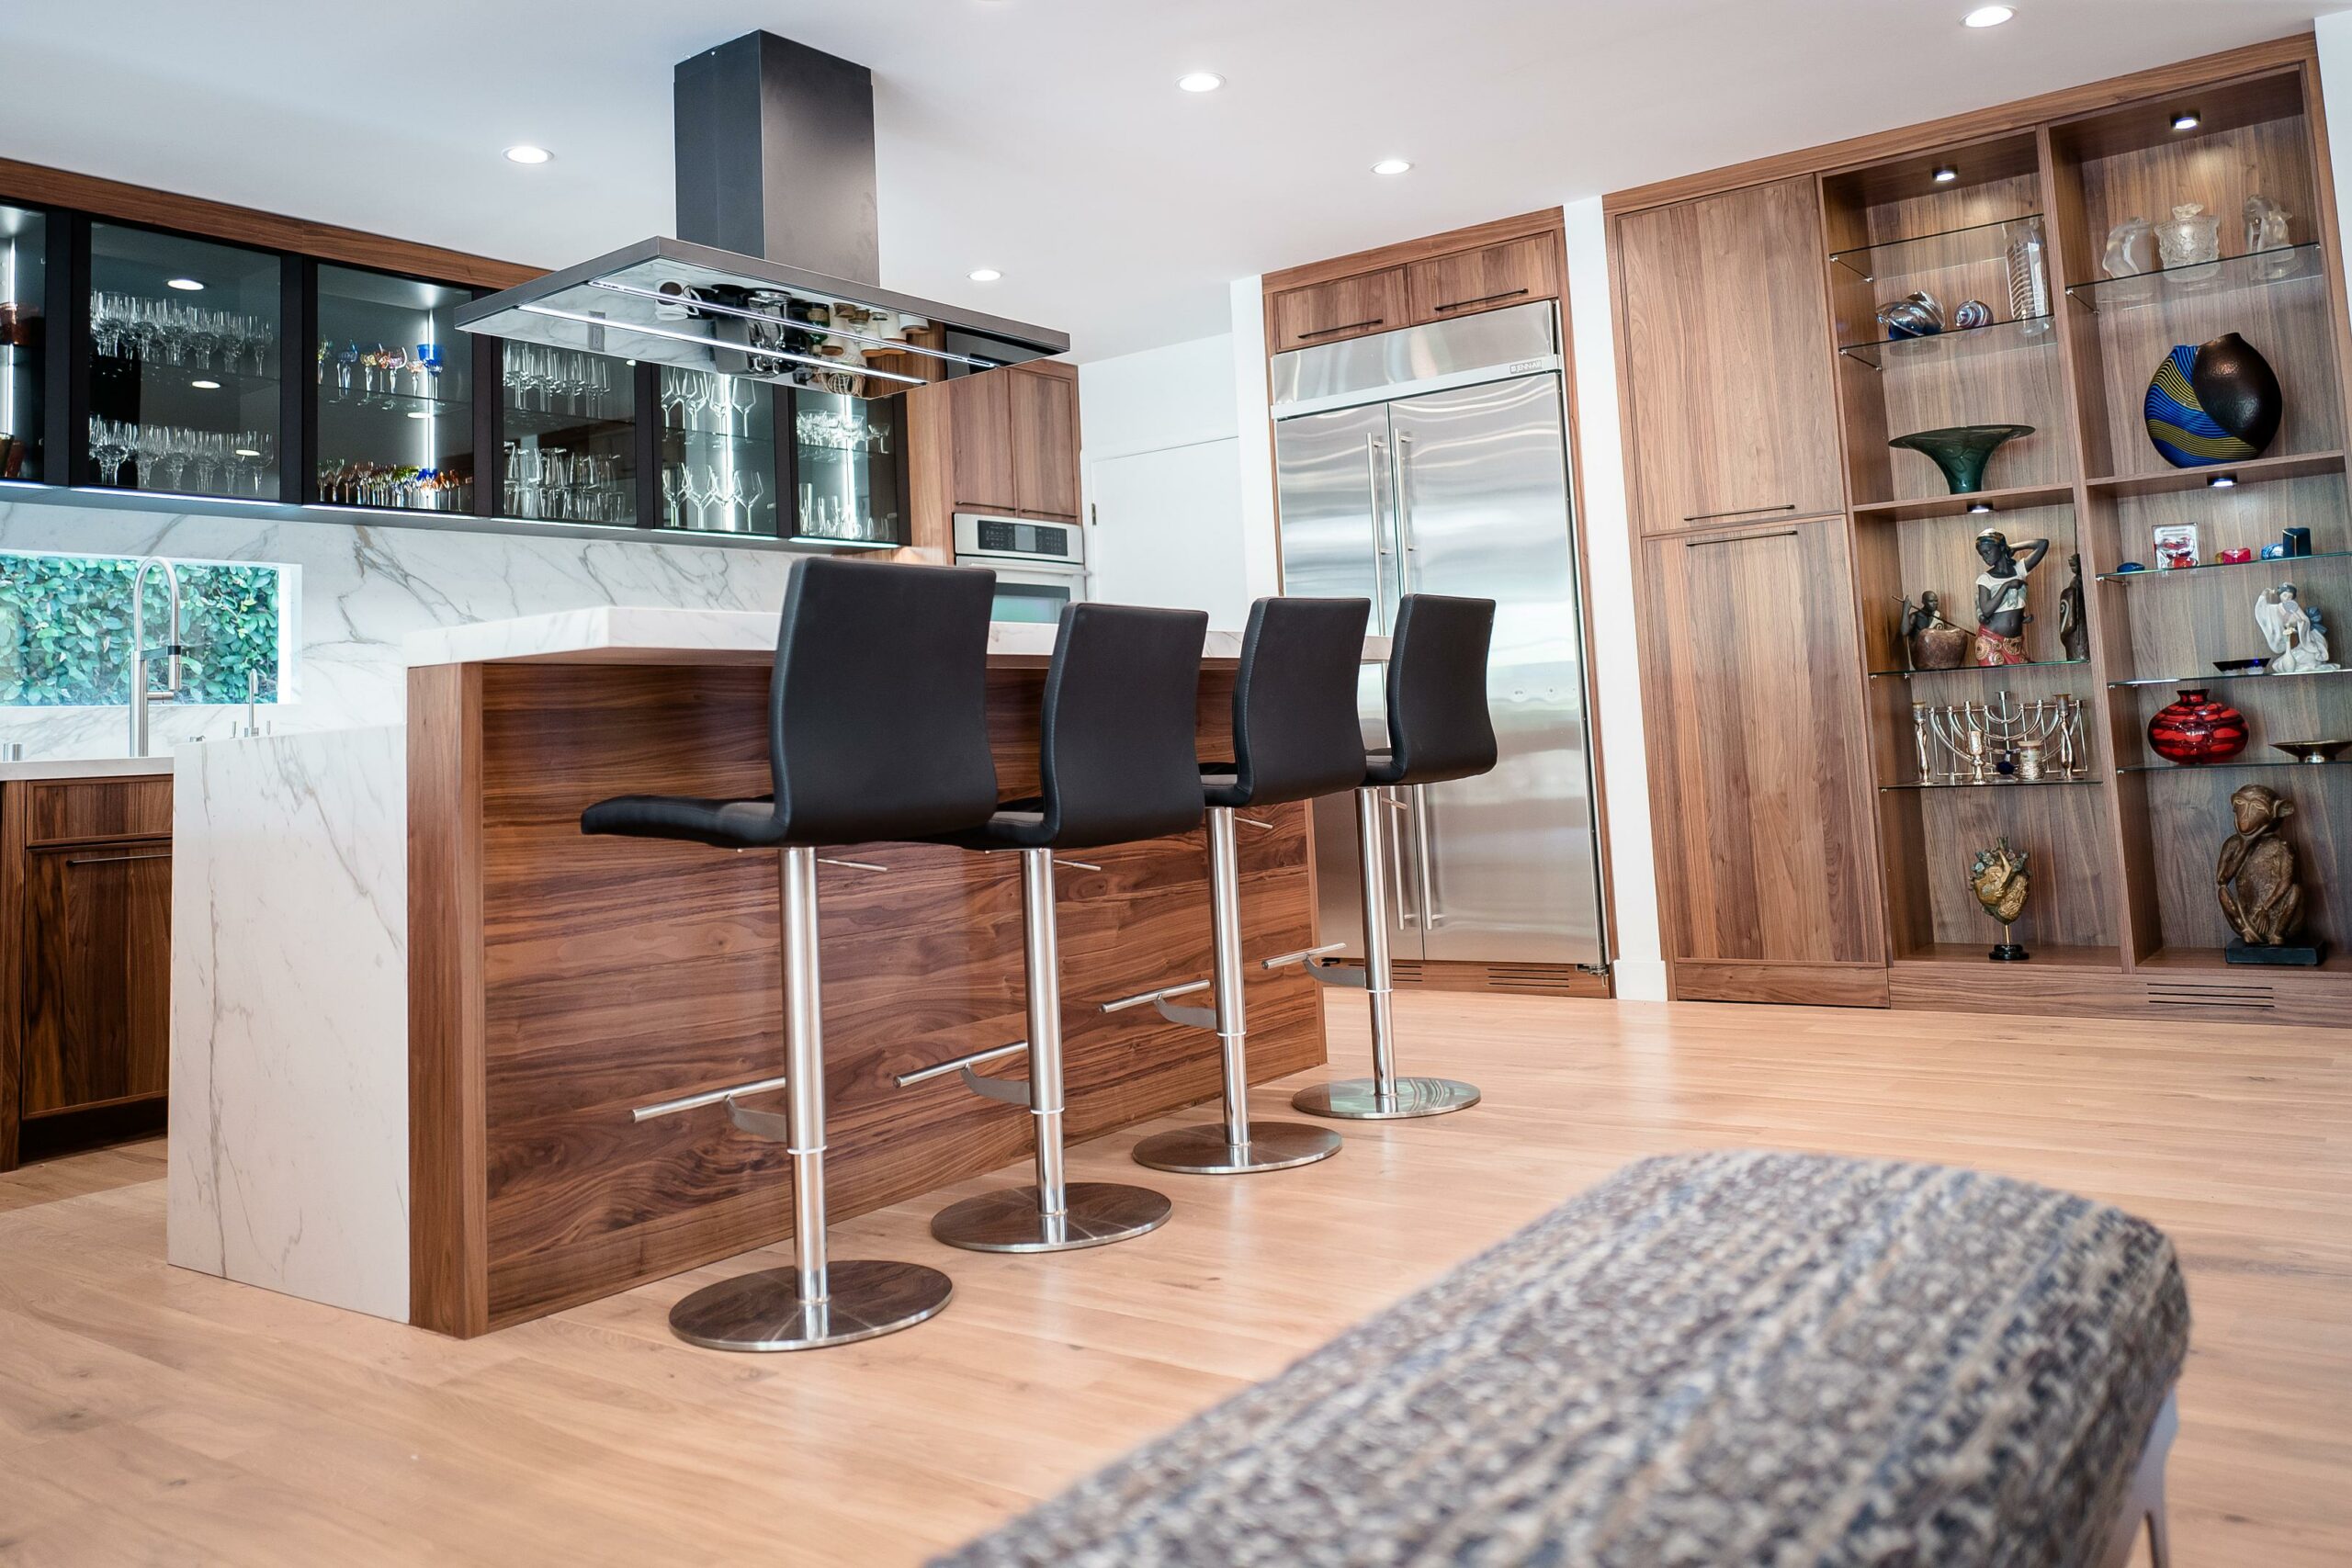 Modern kitchen interior with island and bar stools.